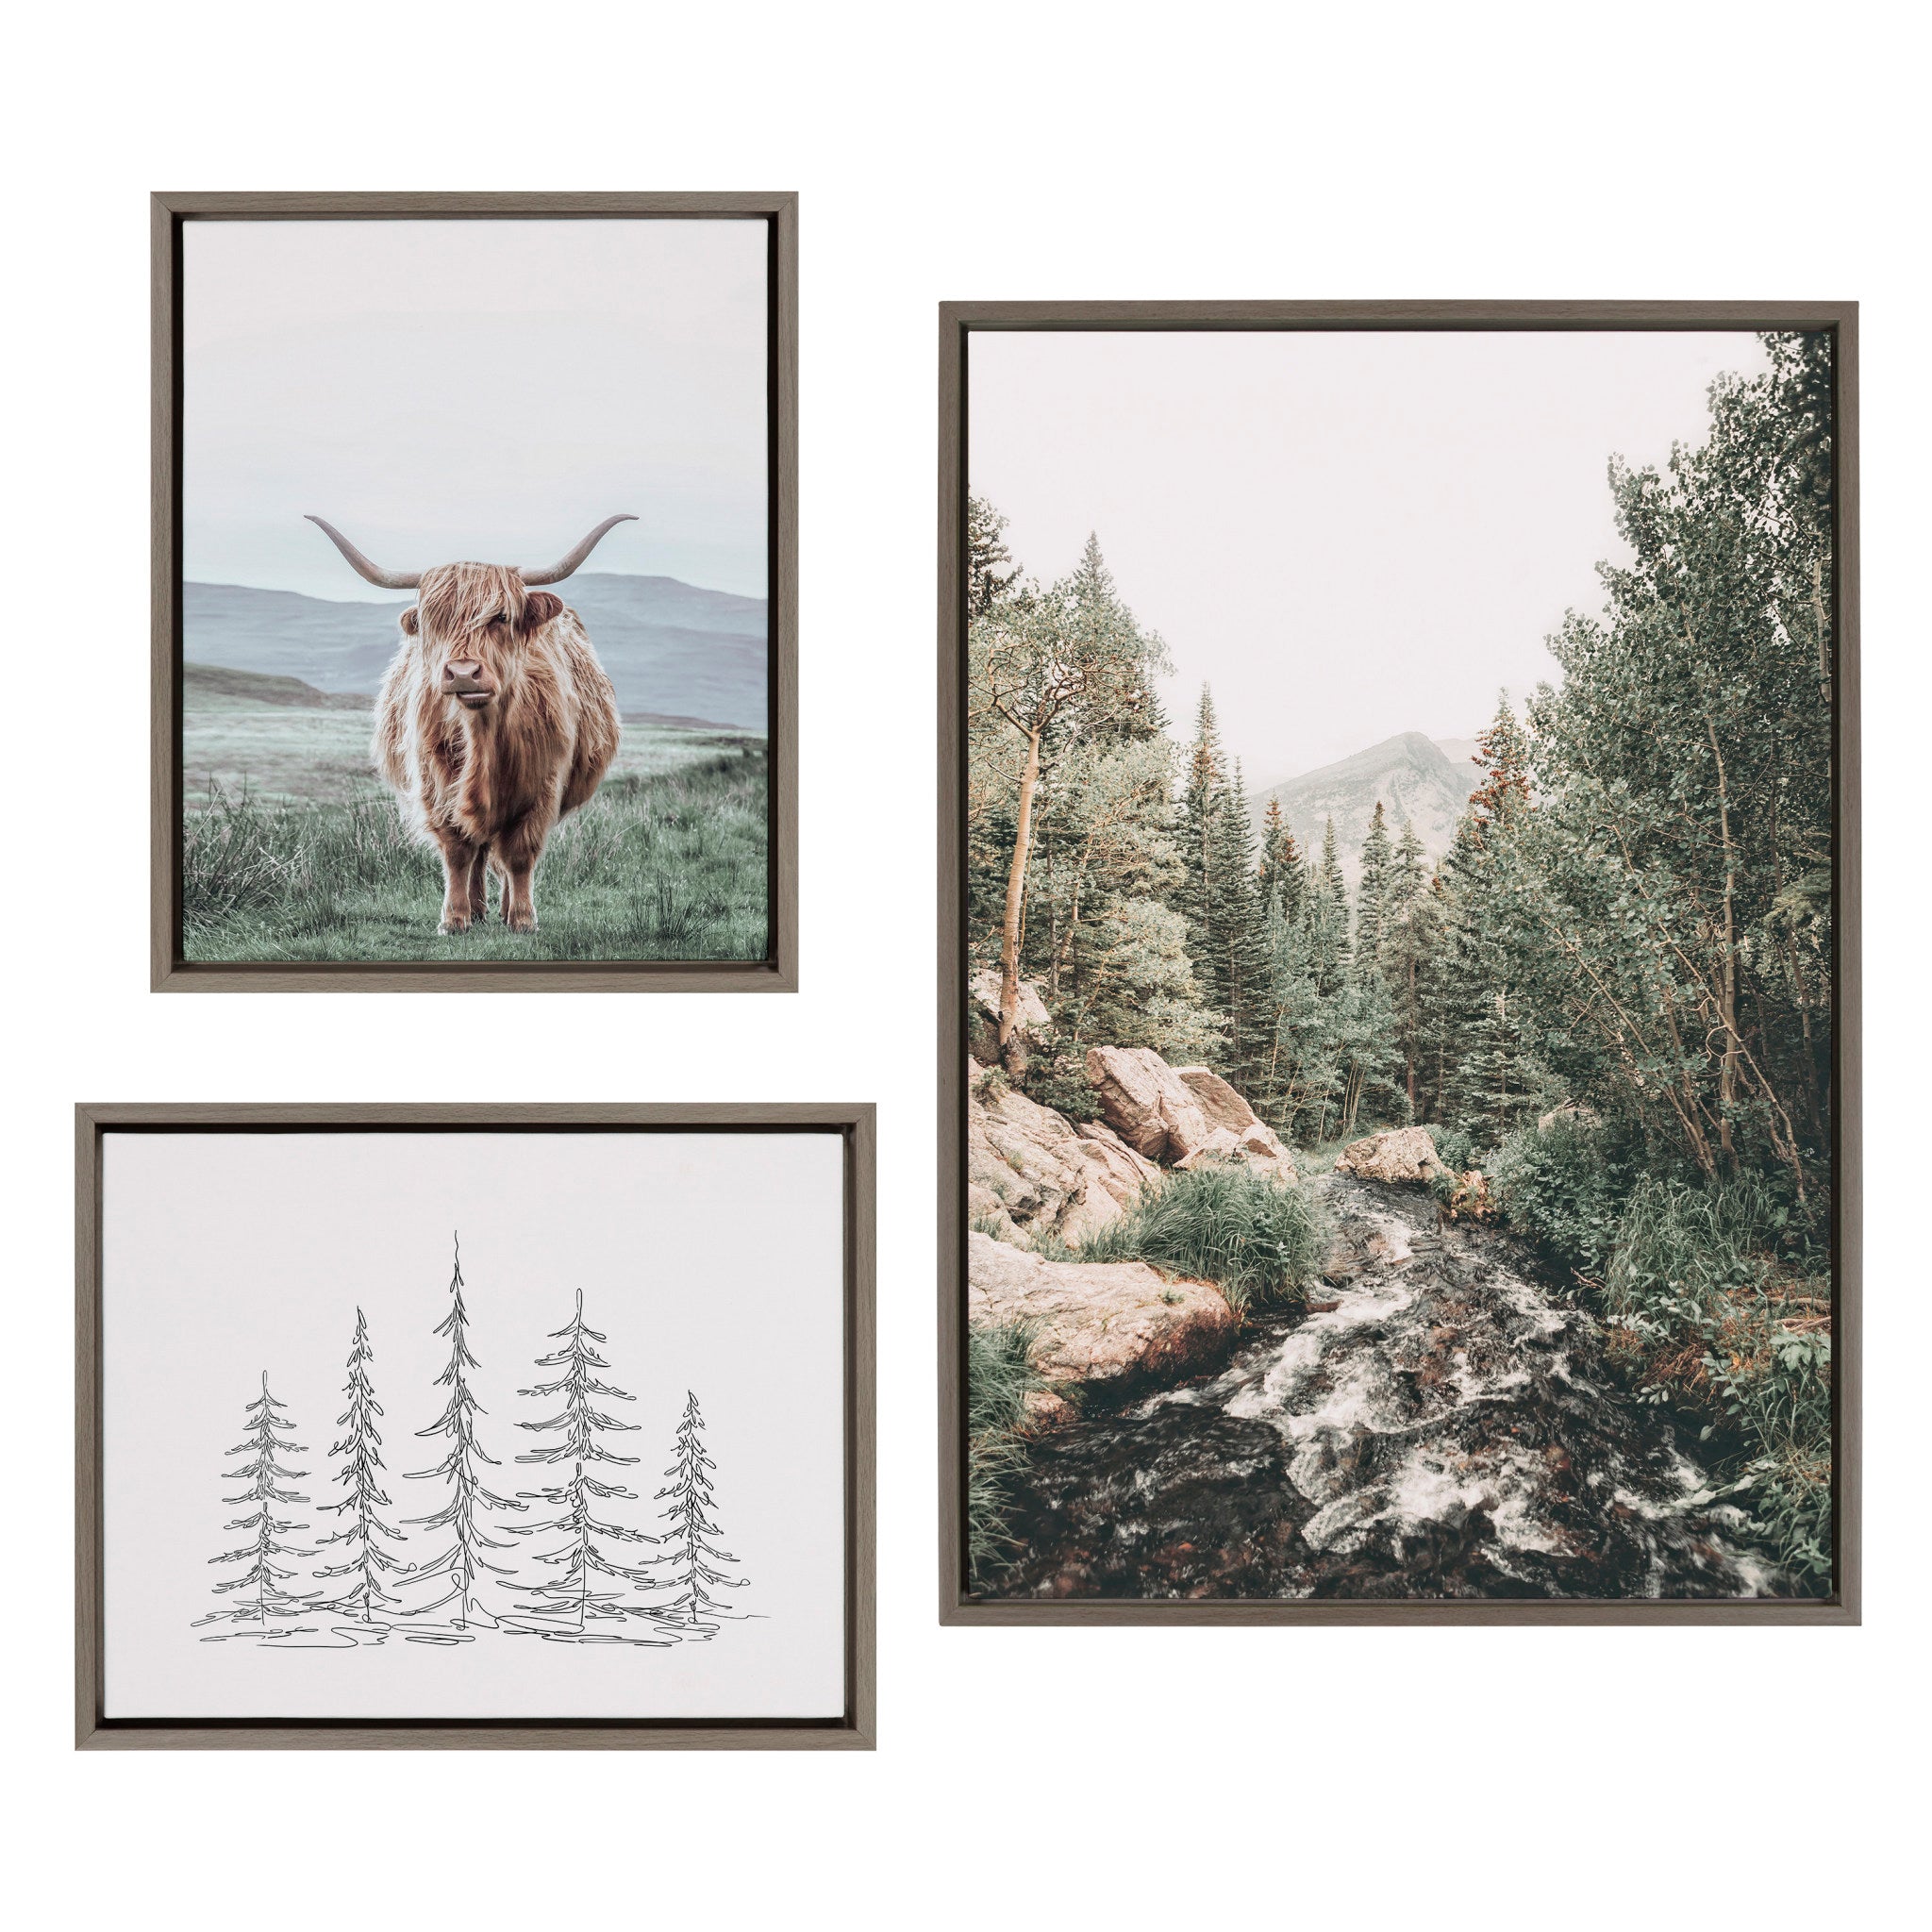 Sylvie Meet Me Here, Highland Cow Muted Mountain Landscape and Minimalist Evergreen Trees Sketch Framed Canvas Set by Various Artists